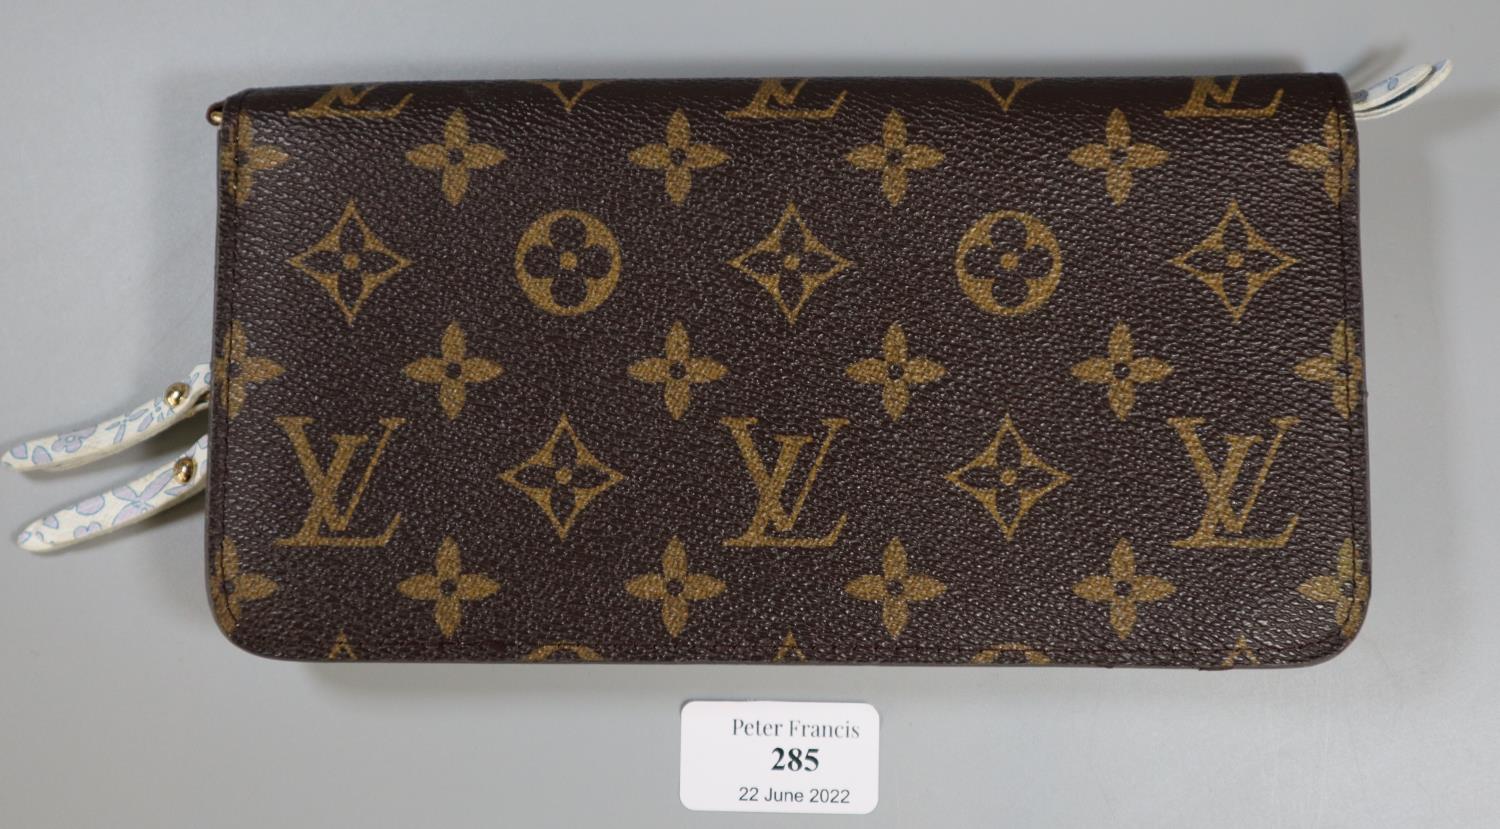 In the style of Louis Vuitton ladies leather purse with gold finish zip. (B.P. 21% + VAT)